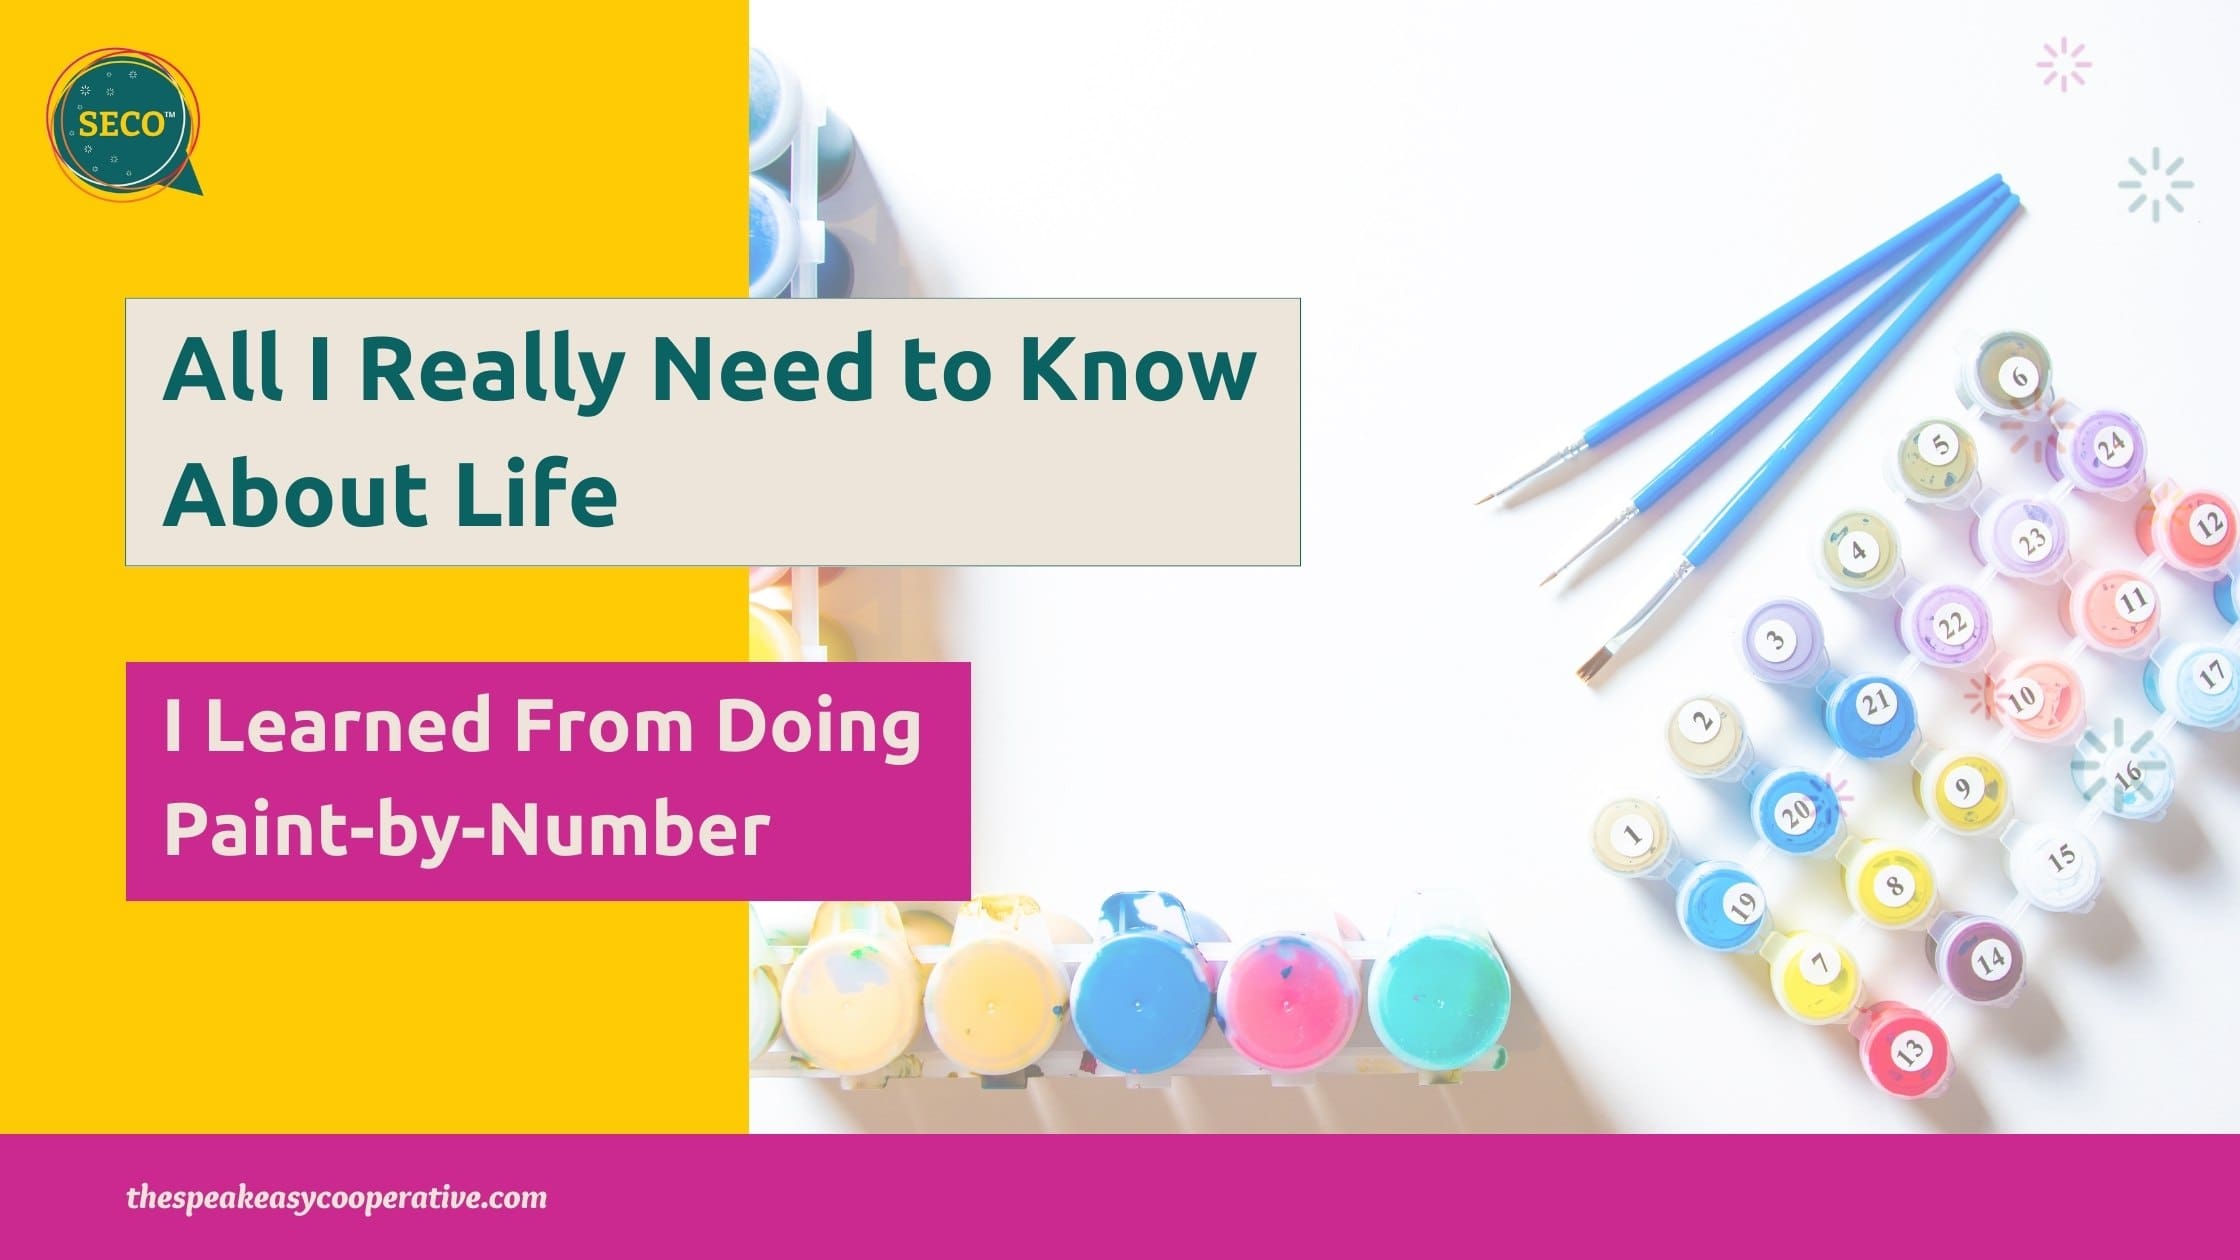 Paint brushes are aligned on a desk with a set of paints. The paints each have a number that matches the color inside. This represents the title of the article, "All I need to know about life, I learned from doing paint by numbers."